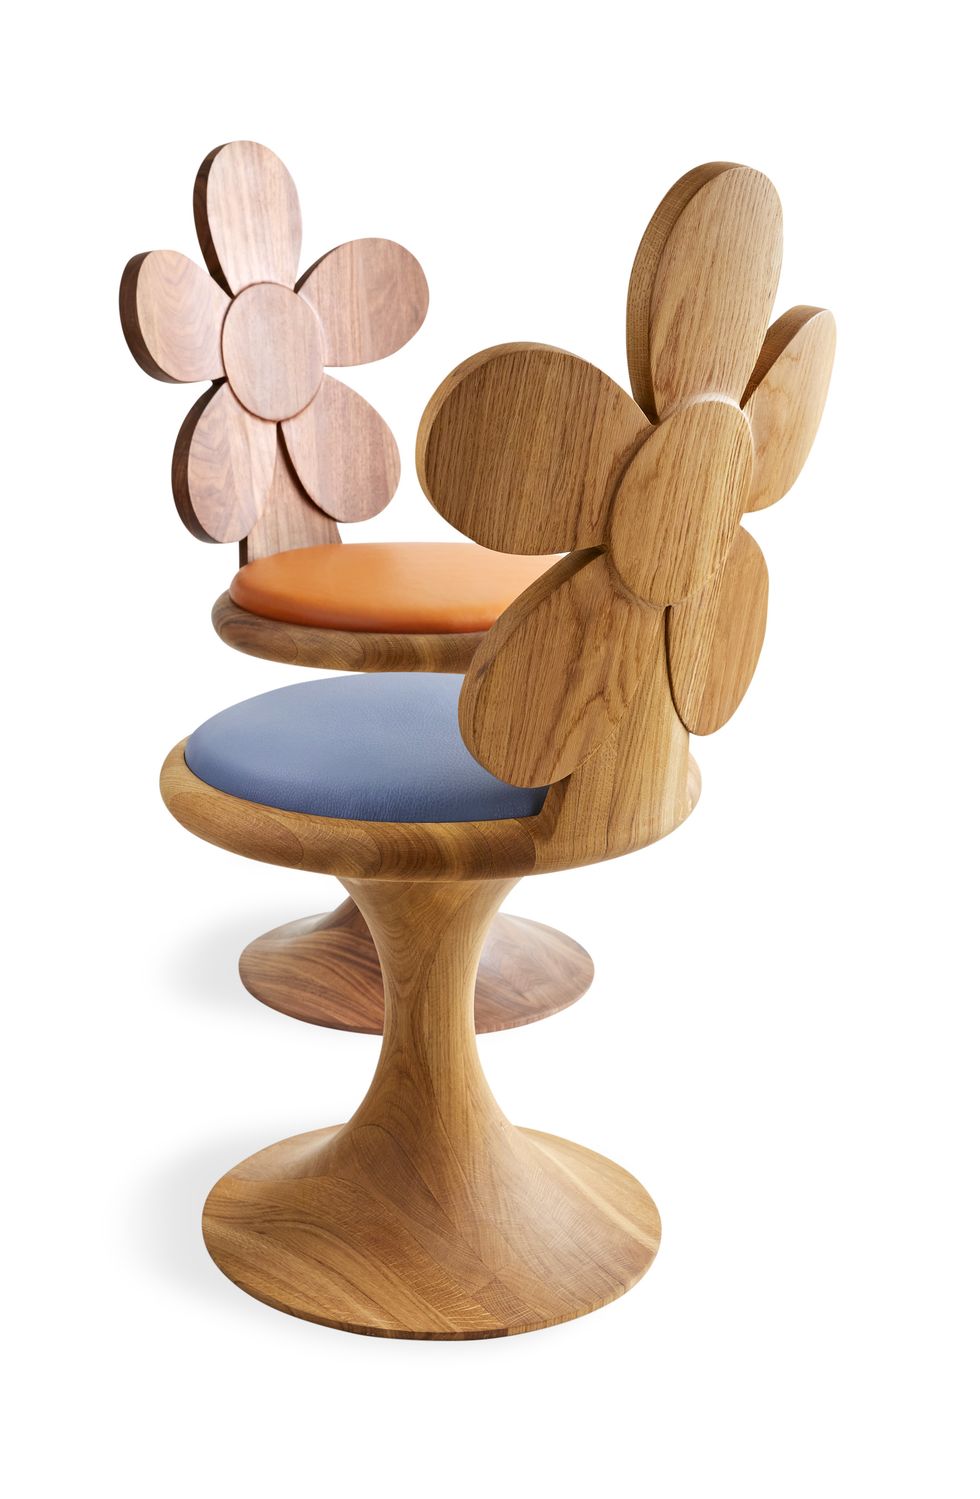 two wooden pedestal chairs with backs in the shape of a daisy and one seat is blue and one is a salmon color